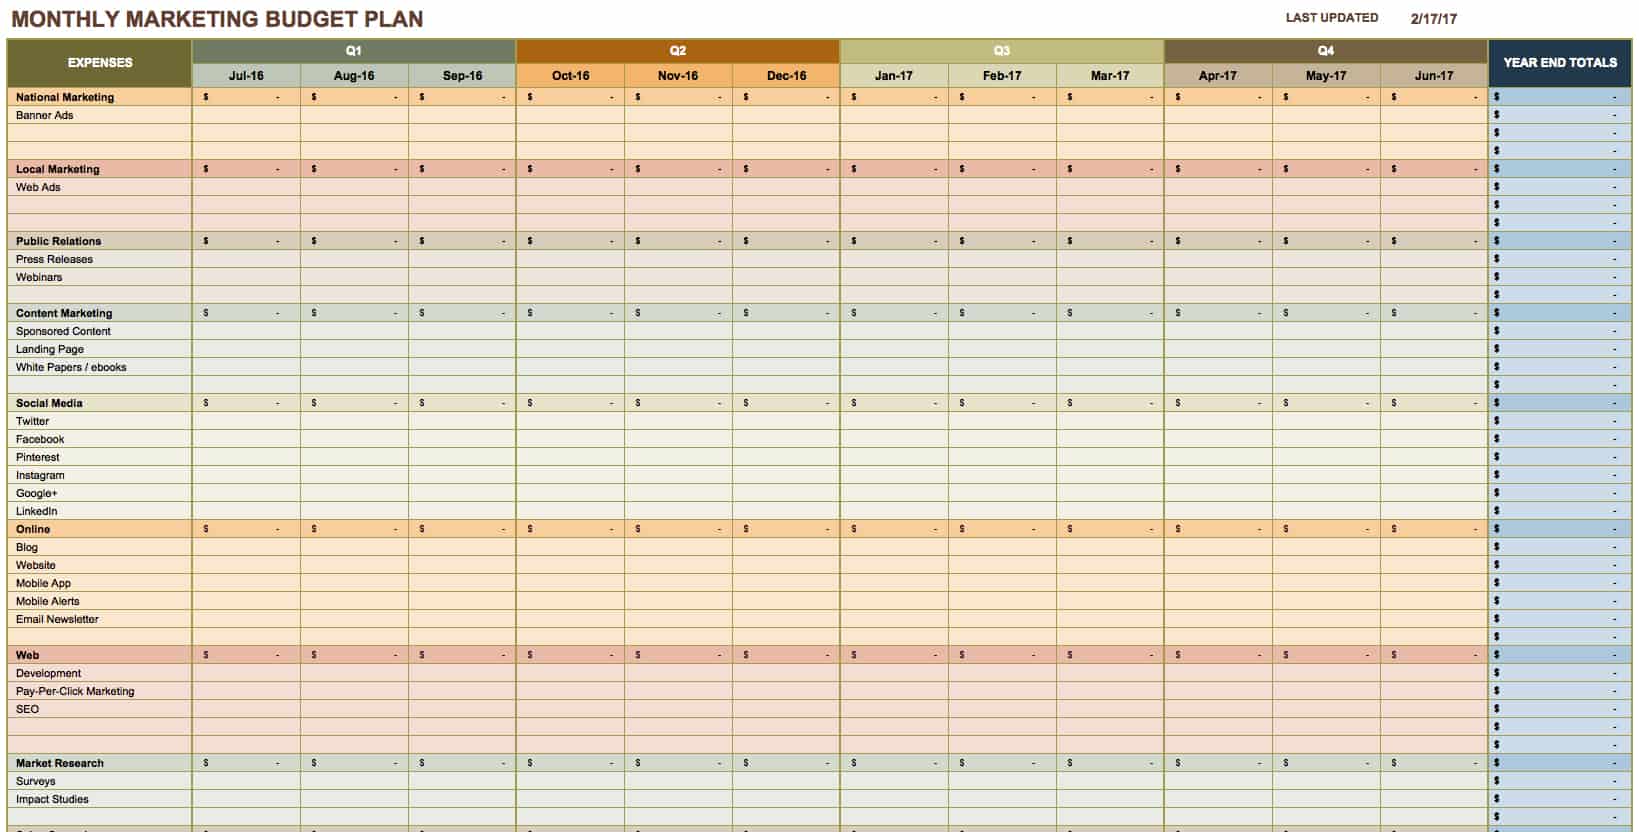 Marketing Budget Template in Excel